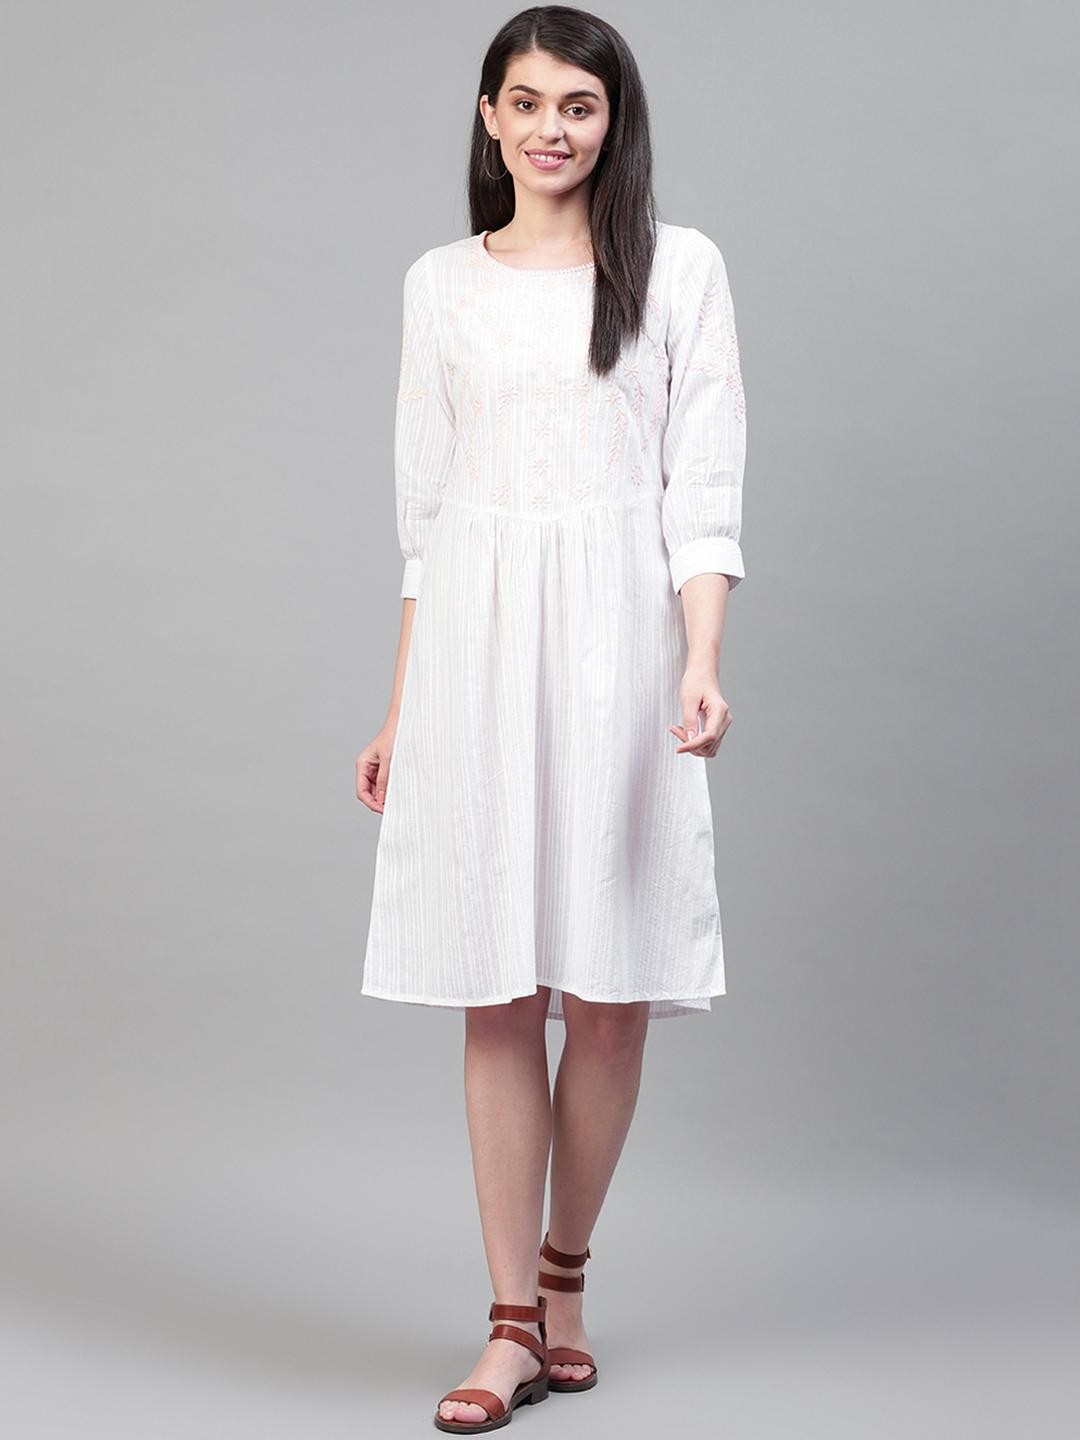 White Cotton embroidered dress